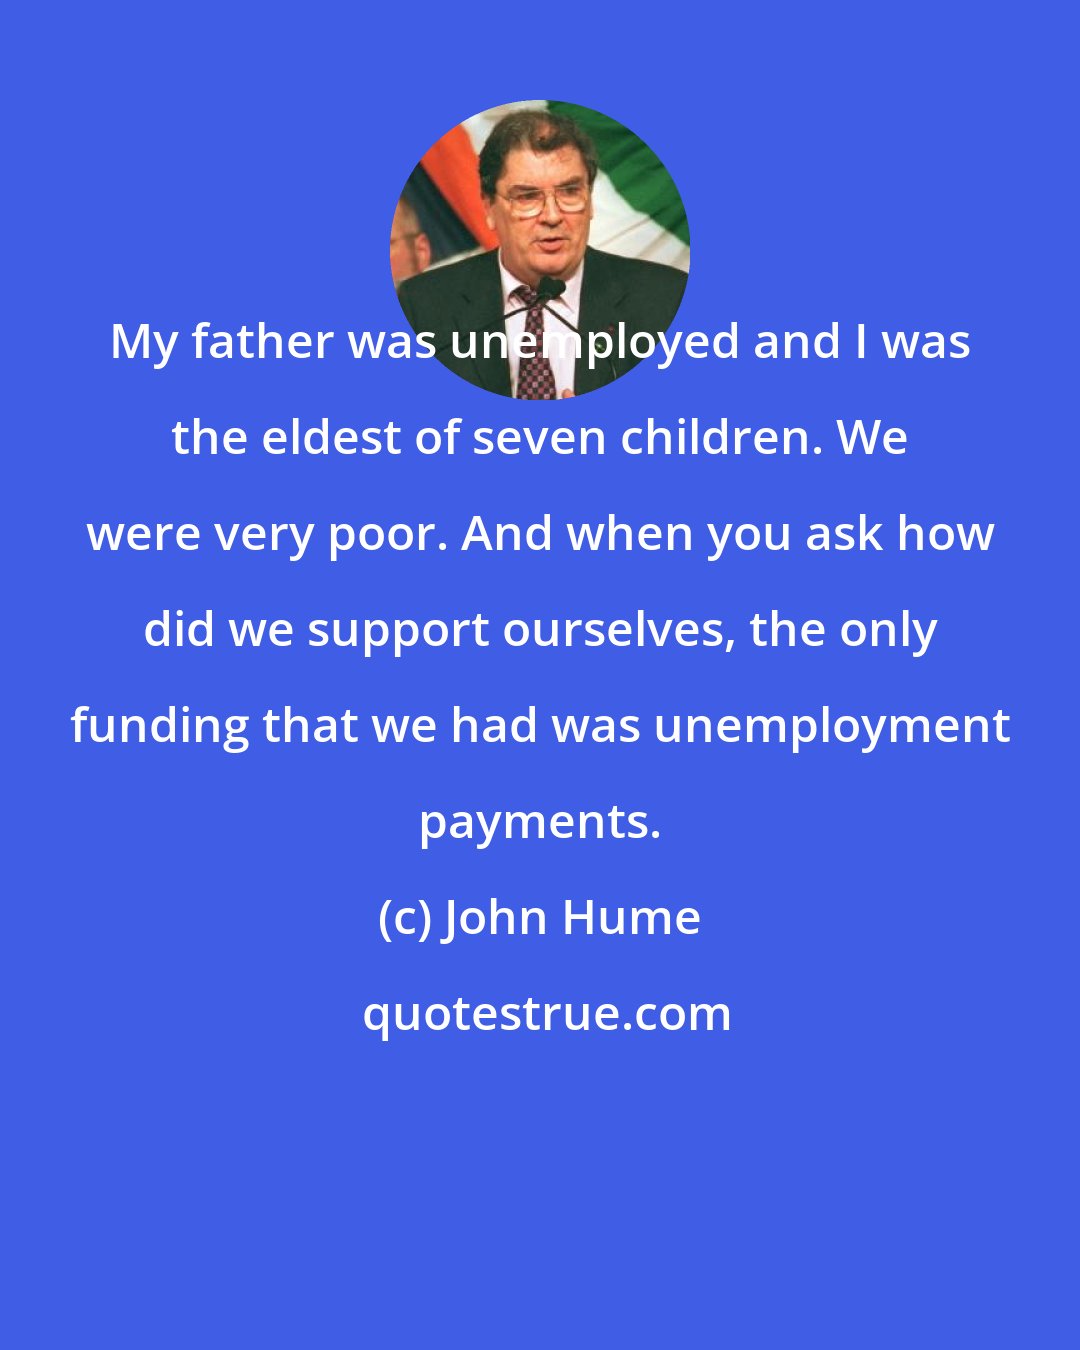 John Hume: My father was unemployed and I was the eldest of seven children. We were very poor. And when you ask how did we support ourselves, the only funding that we had was unemployment payments.